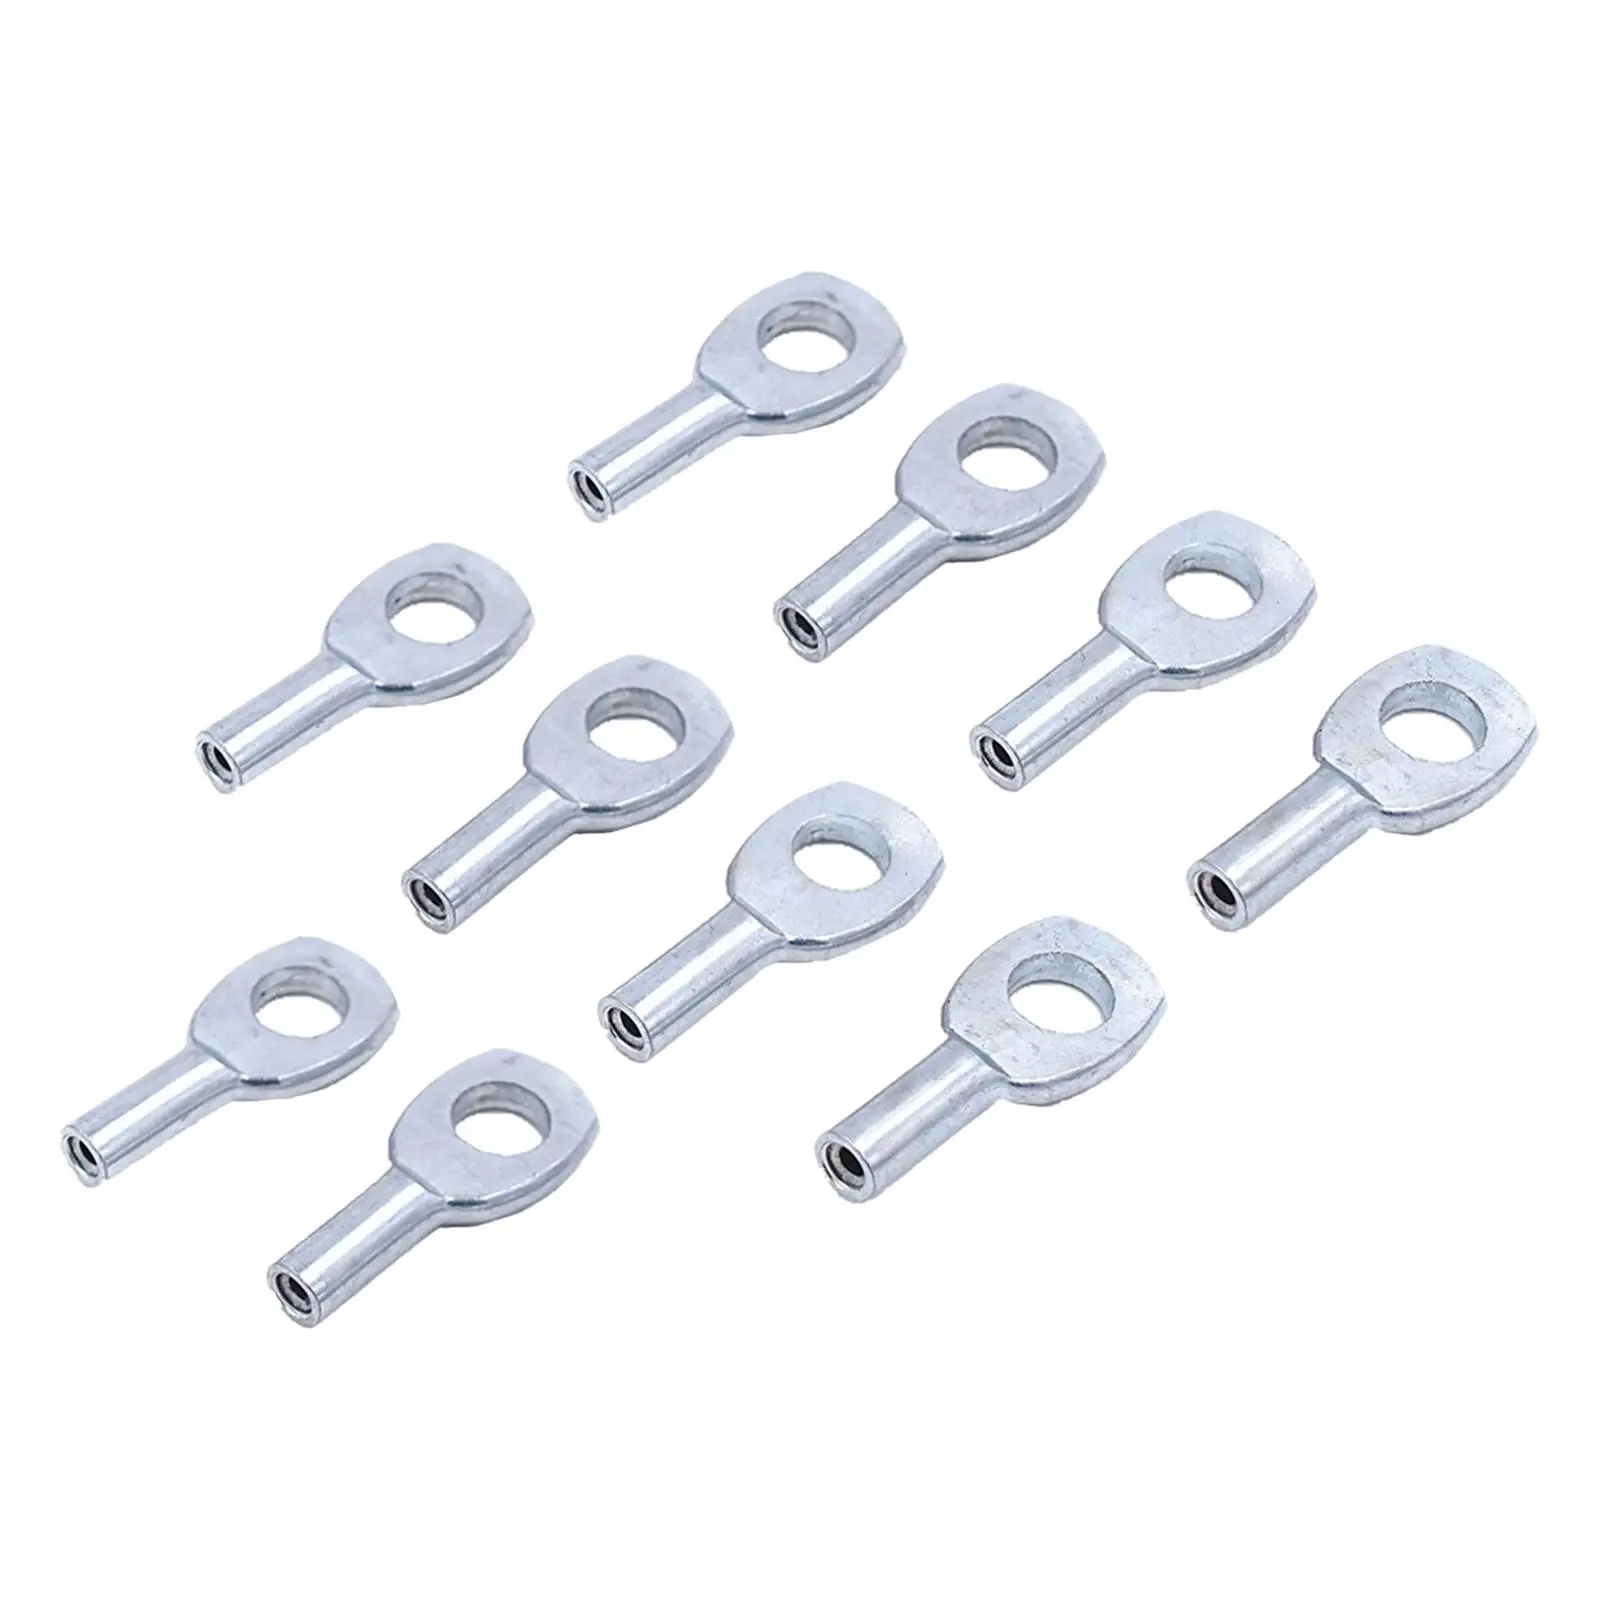 10 Pack Steel Wire Rope Eyelets Strength Training Exercise Machine Eyelet Terminal Connector Attachments for 2mm Wire Rope